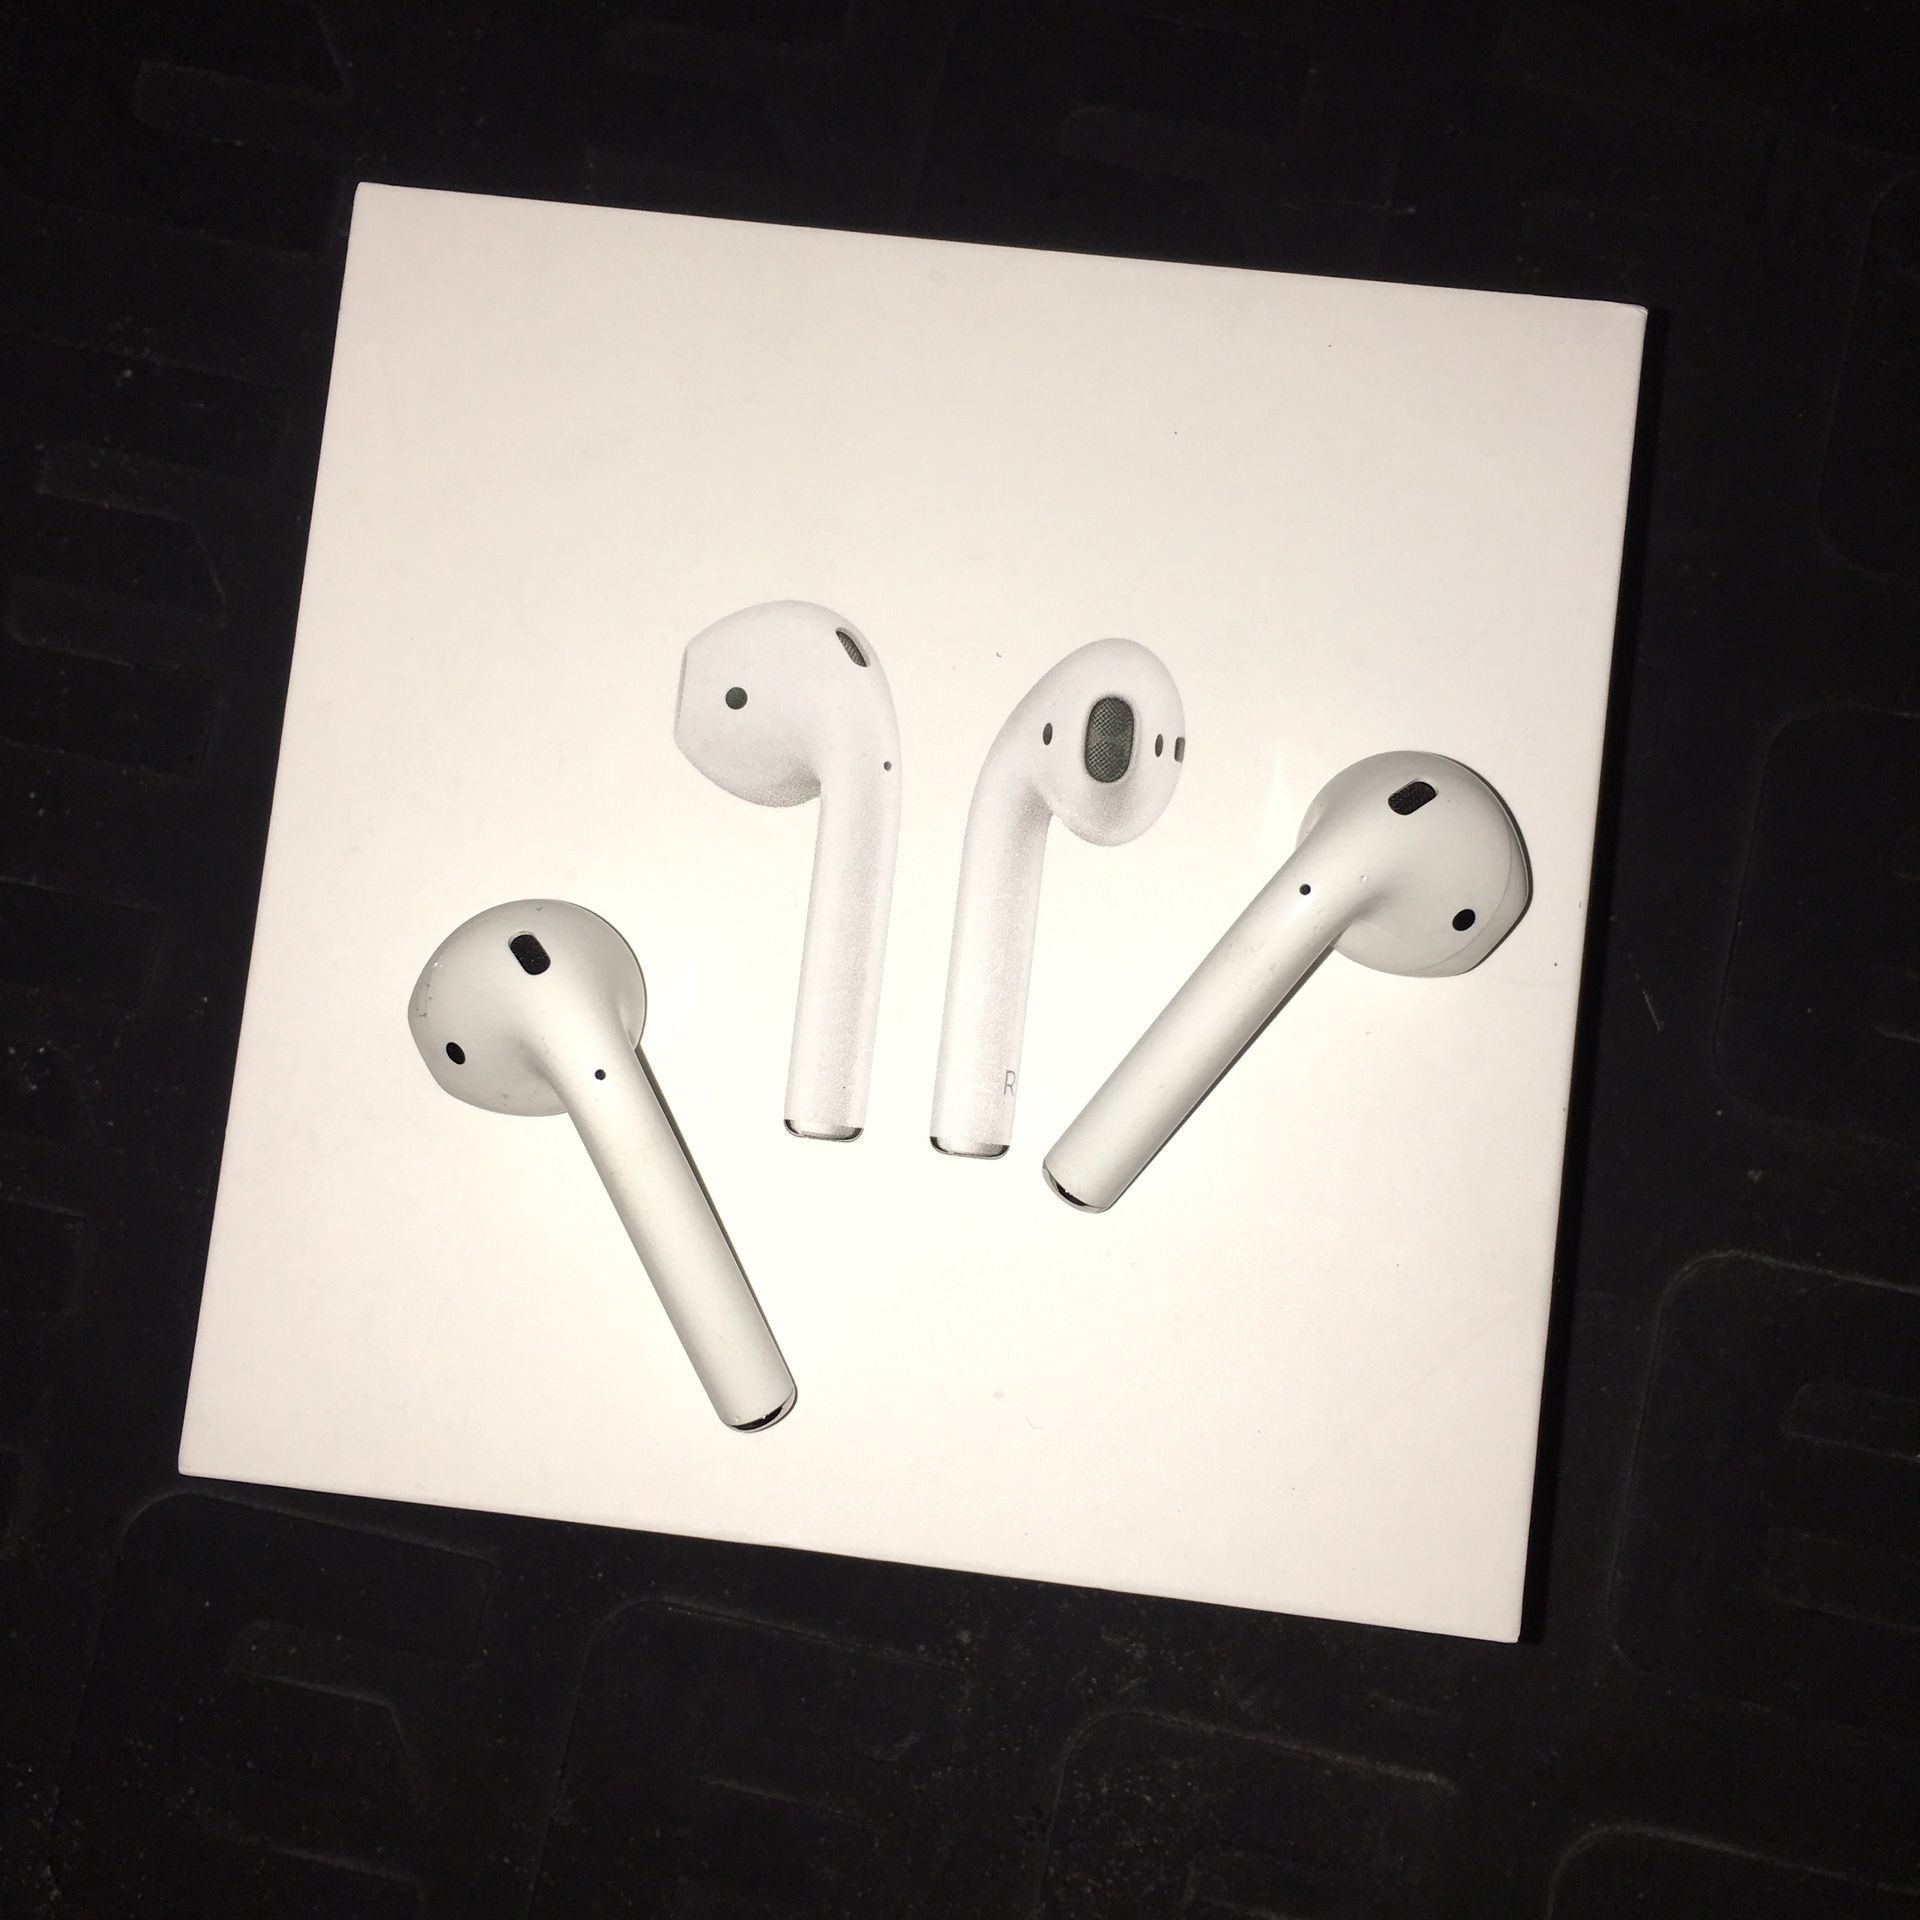 AIRPODS ONLY! NO CHARGING CASE! WIRELESS HEADPHONES.